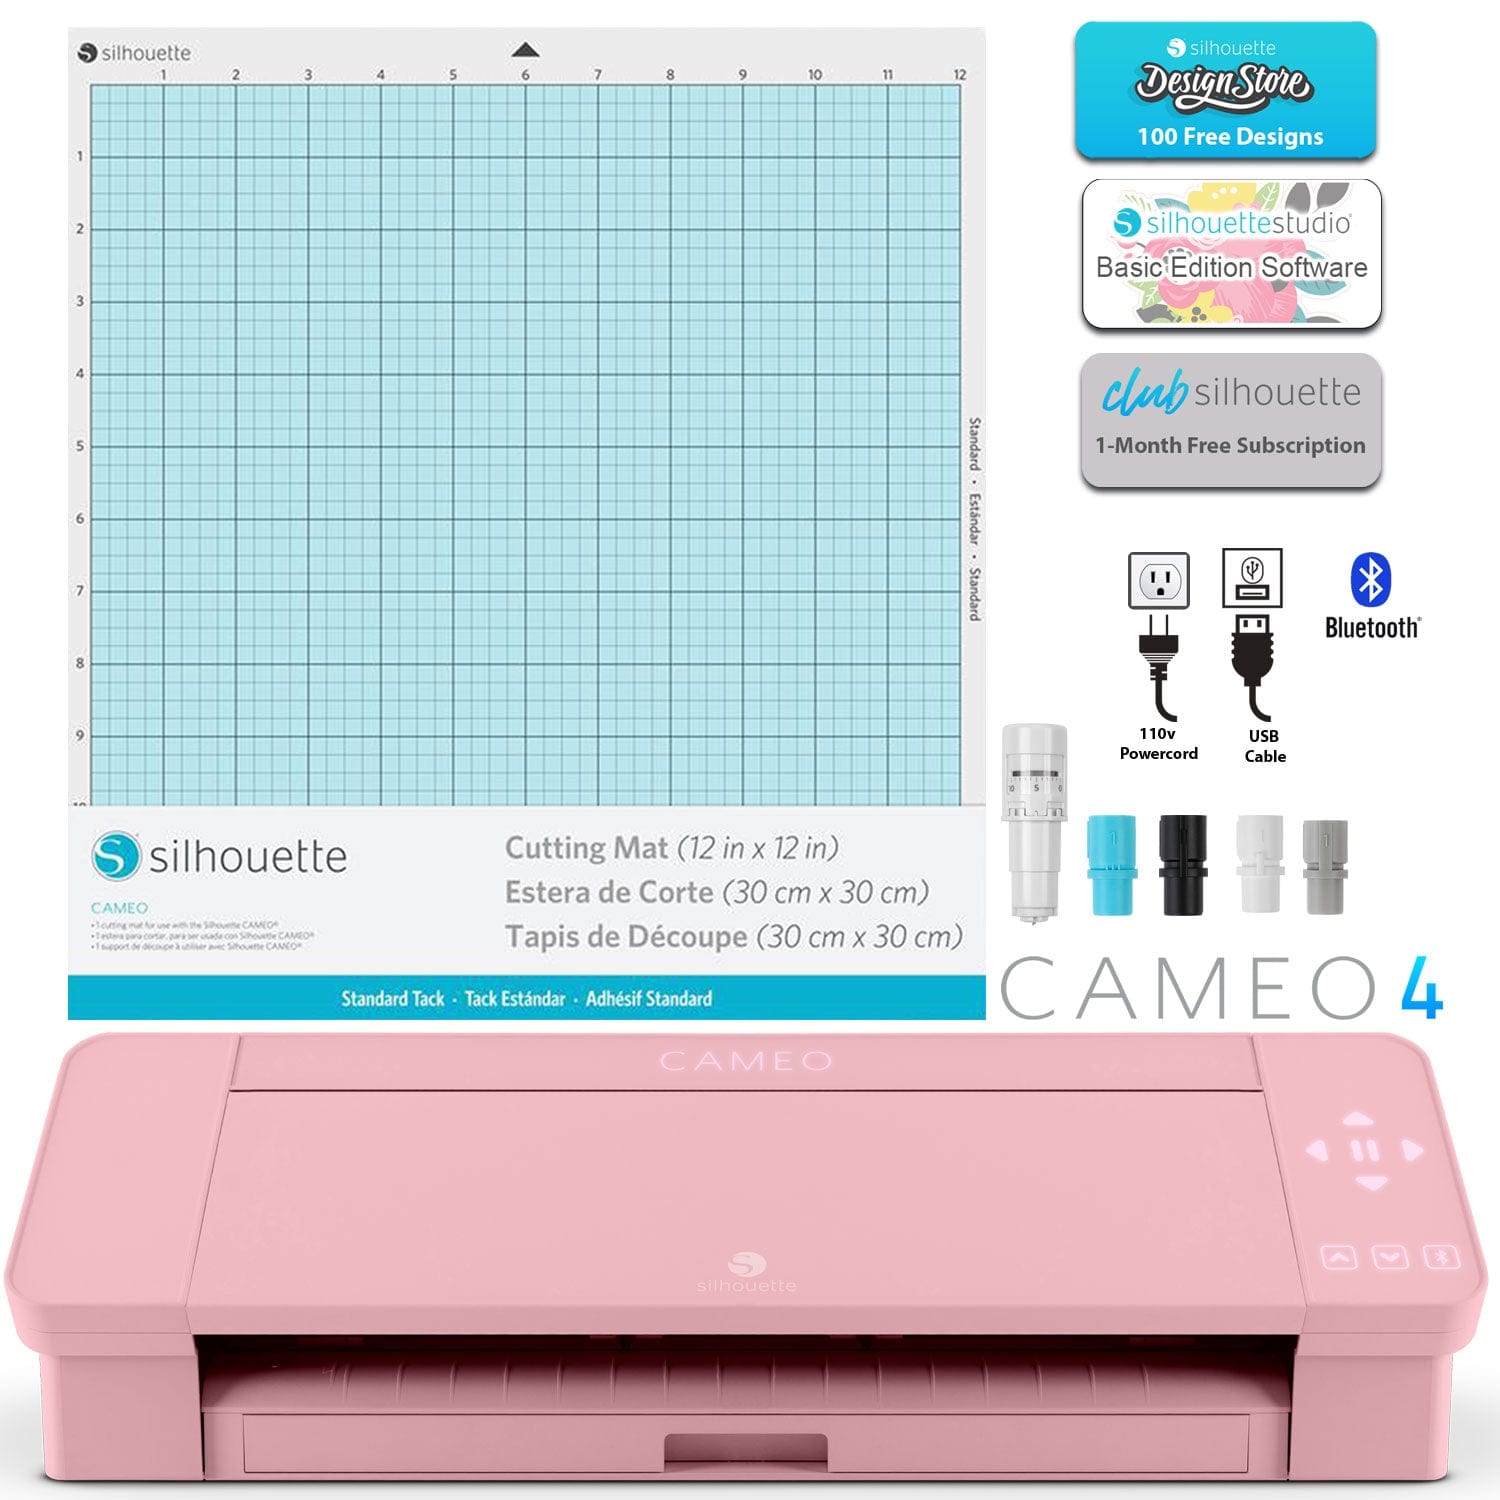 craftercuts Silhouette Cameo 4 T-Shirt Making Bundle- Includes 28 total Sheets of Heat Transfer Vinyl, Deluxe Vinyl Tool Kit, Startup Guide, and Bonus Design-Pink Edition